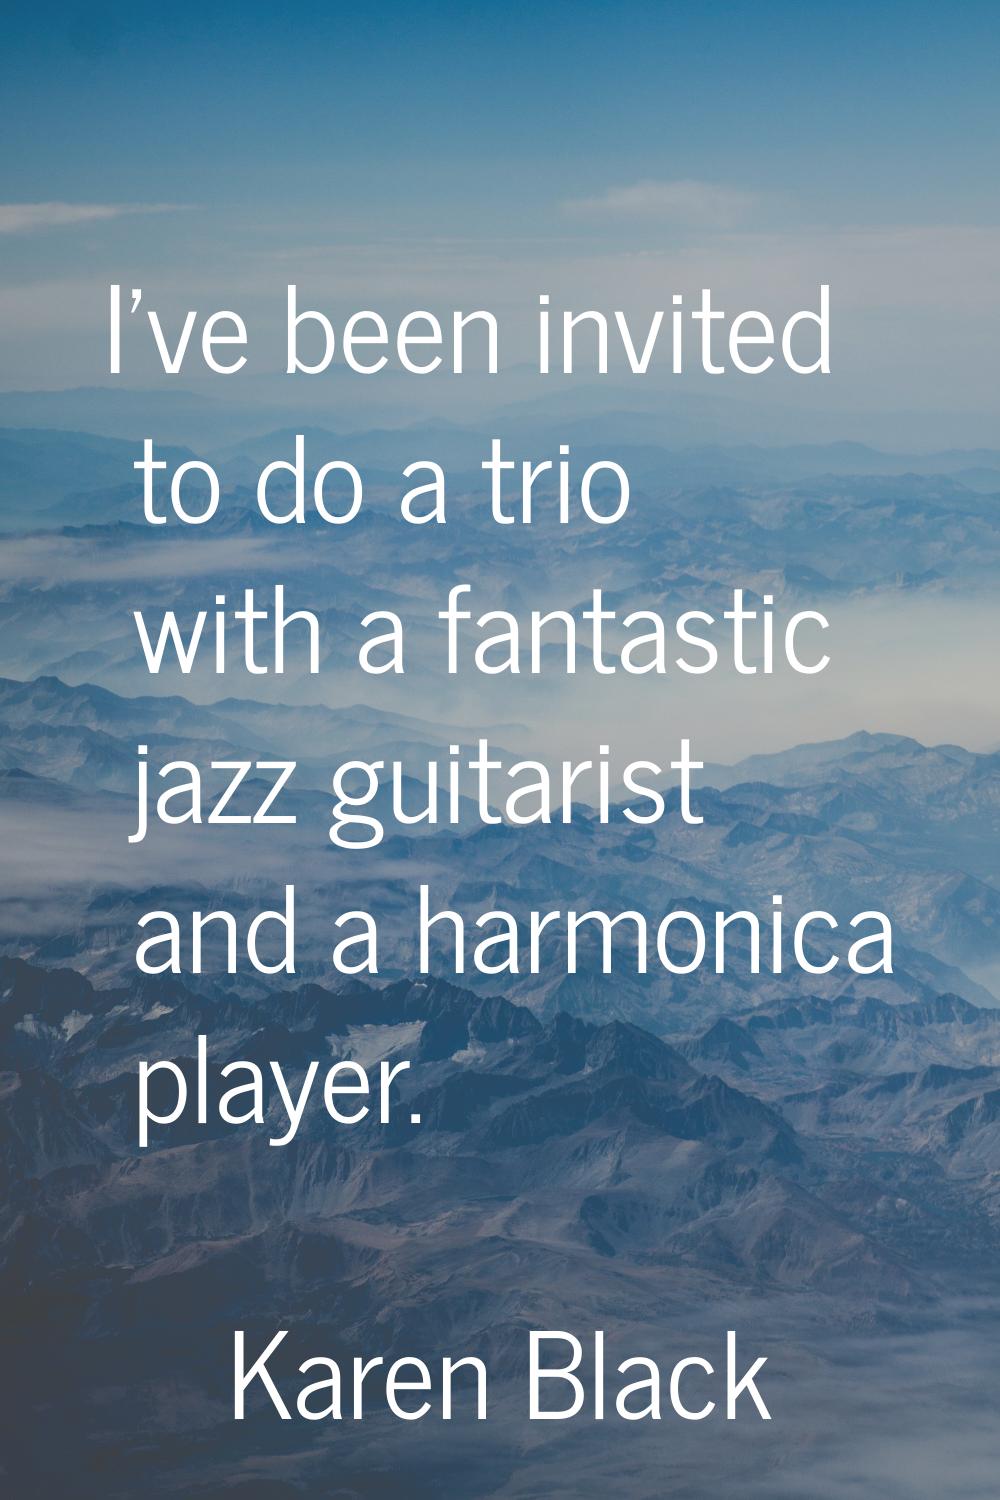 I've been invited to do a trio with a fantastic jazz guitarist and a harmonica player.